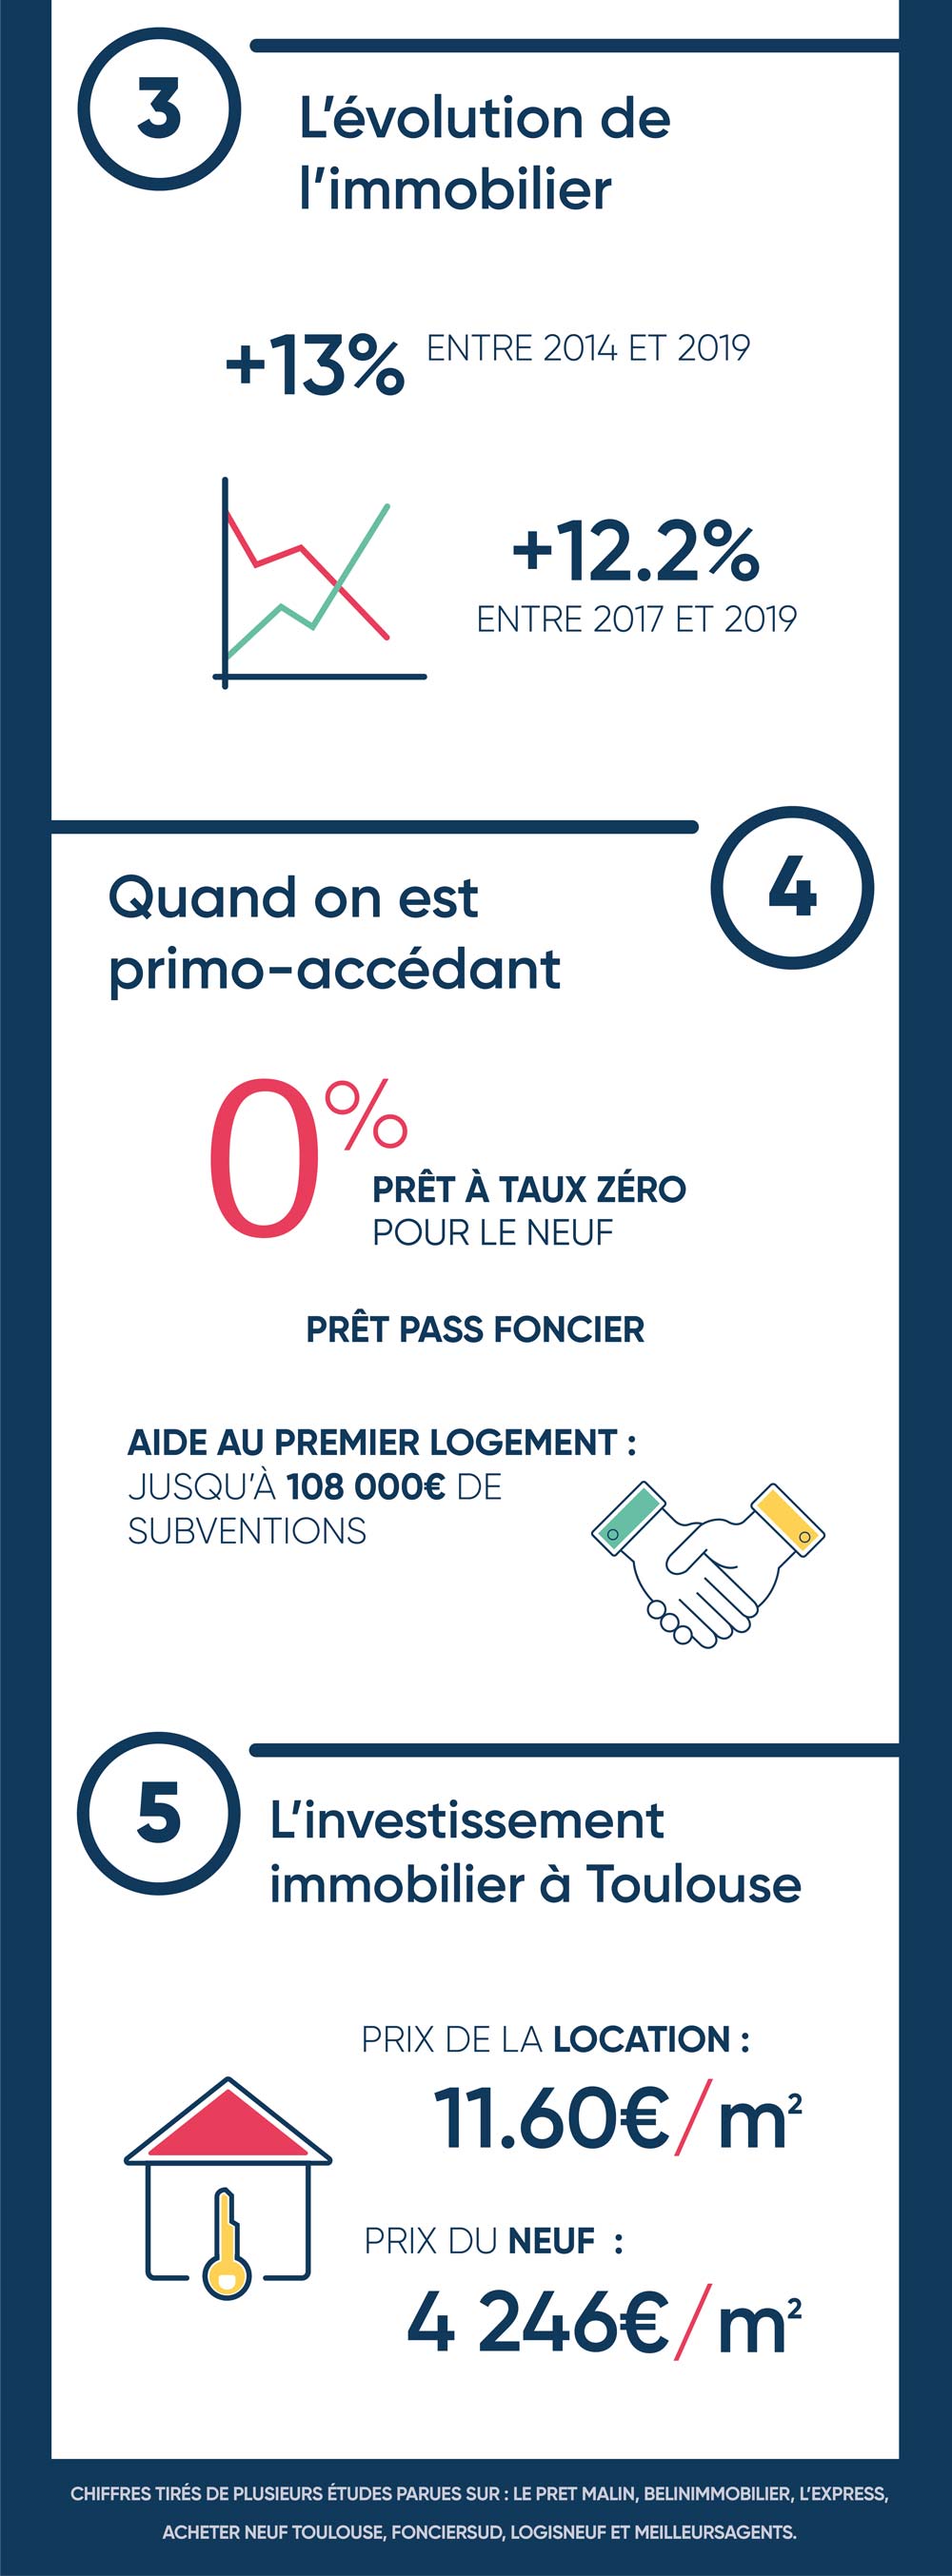 infographie immobilier Toulouse partie 2